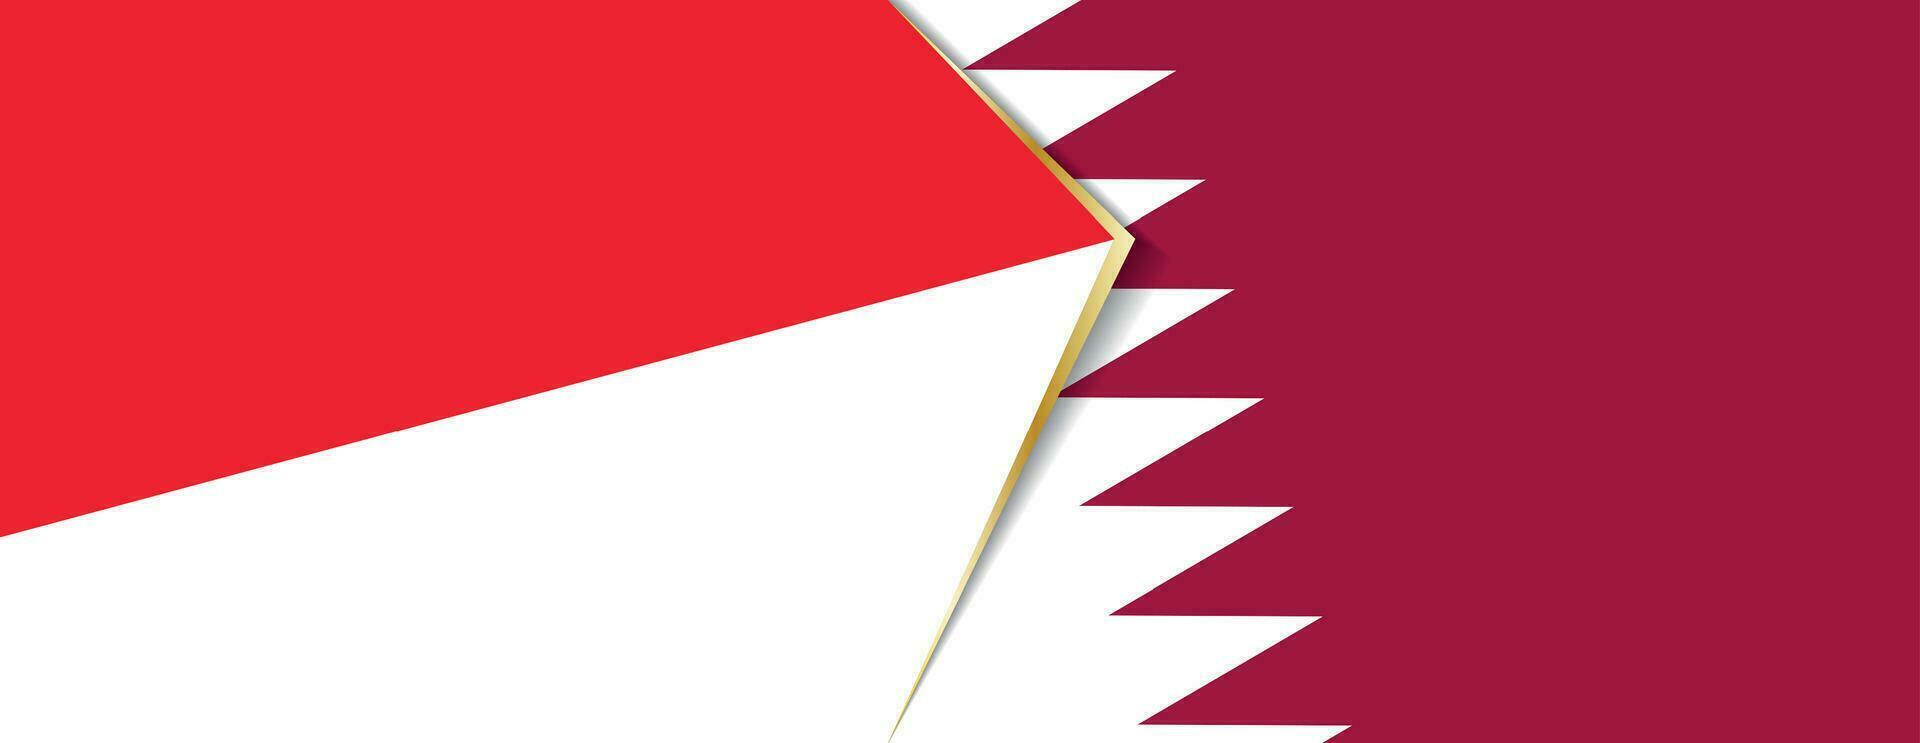 Indonesia and Qatar flags, two vector flags.